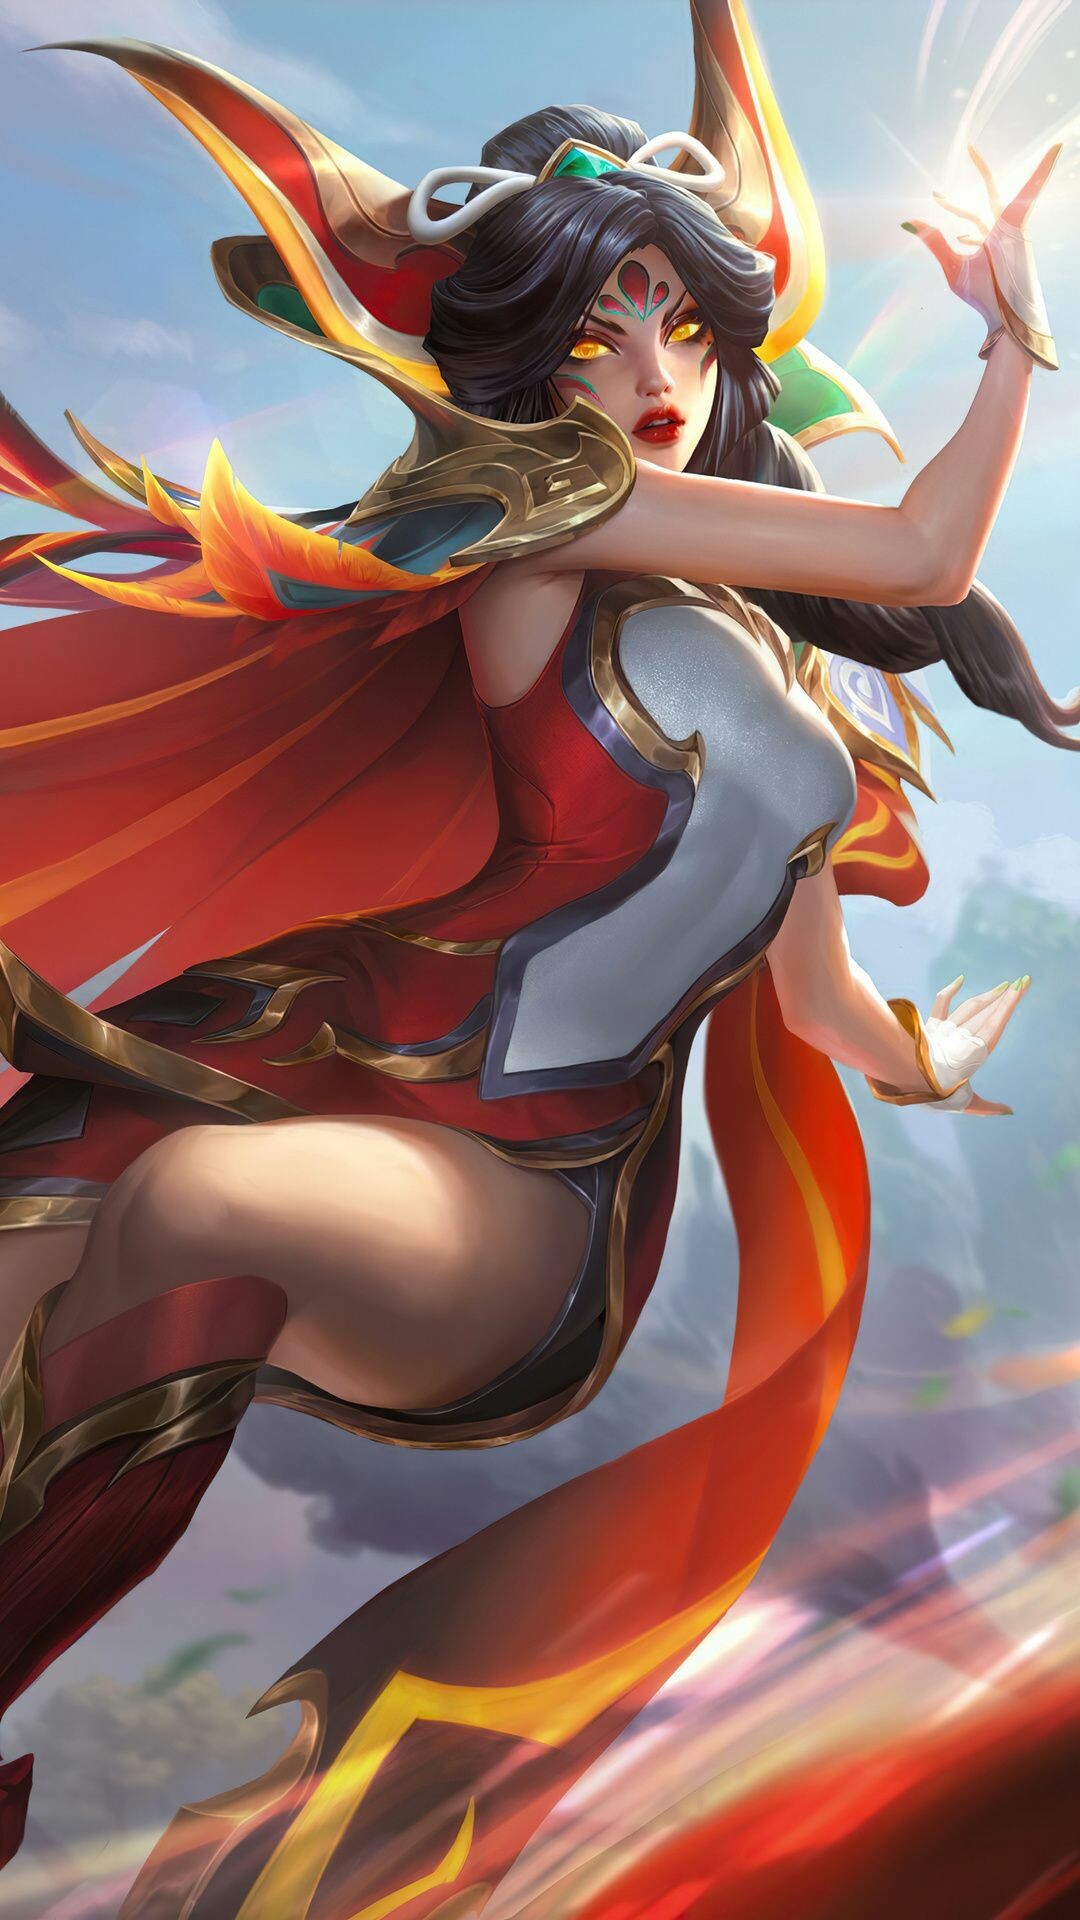 League of Legends: Xayah, the Rebel, Marksman, Riot Games, MOBA. 1080x1920 Full HD Background.